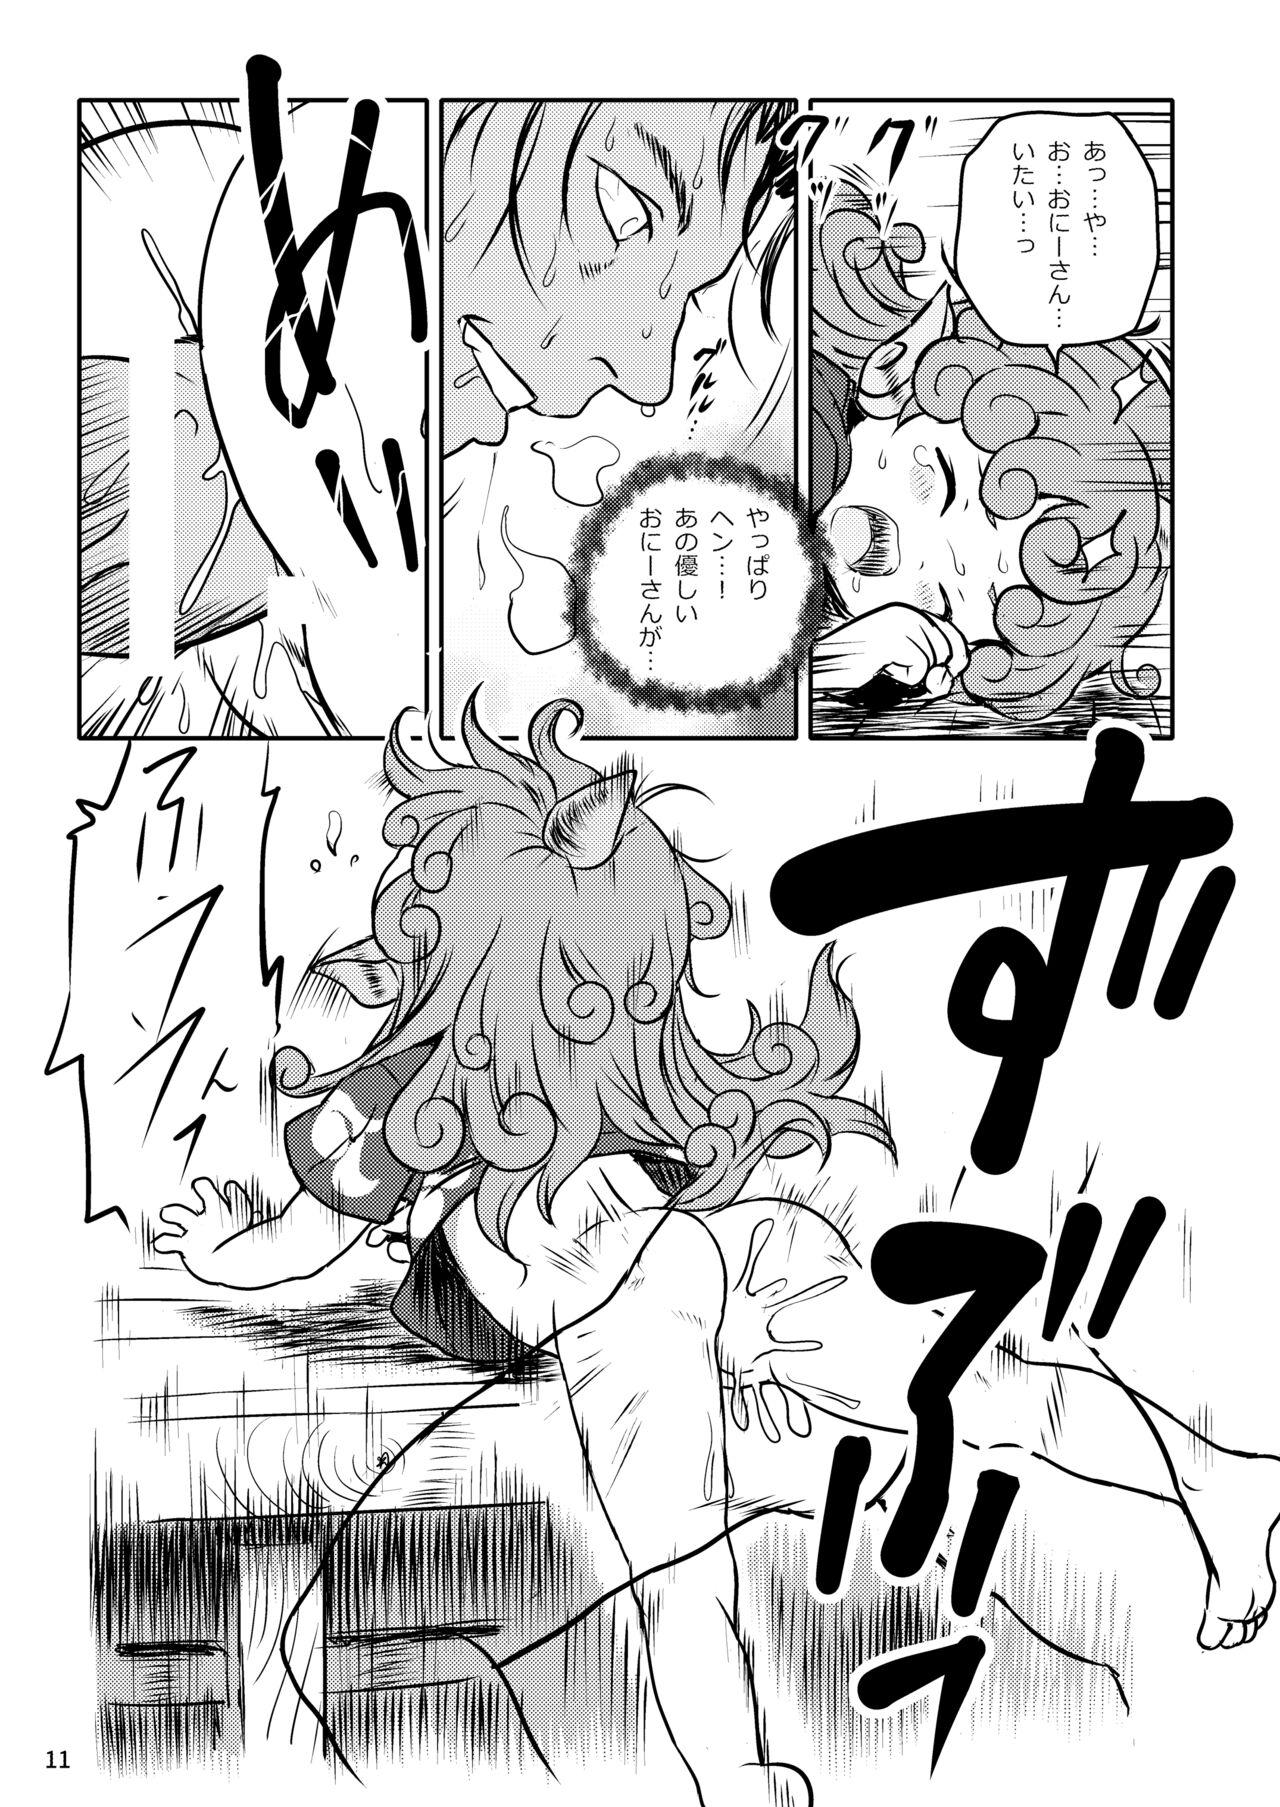 Topless Haratte! Aun-chan! - Touhou project Teenage Sex - Page 11